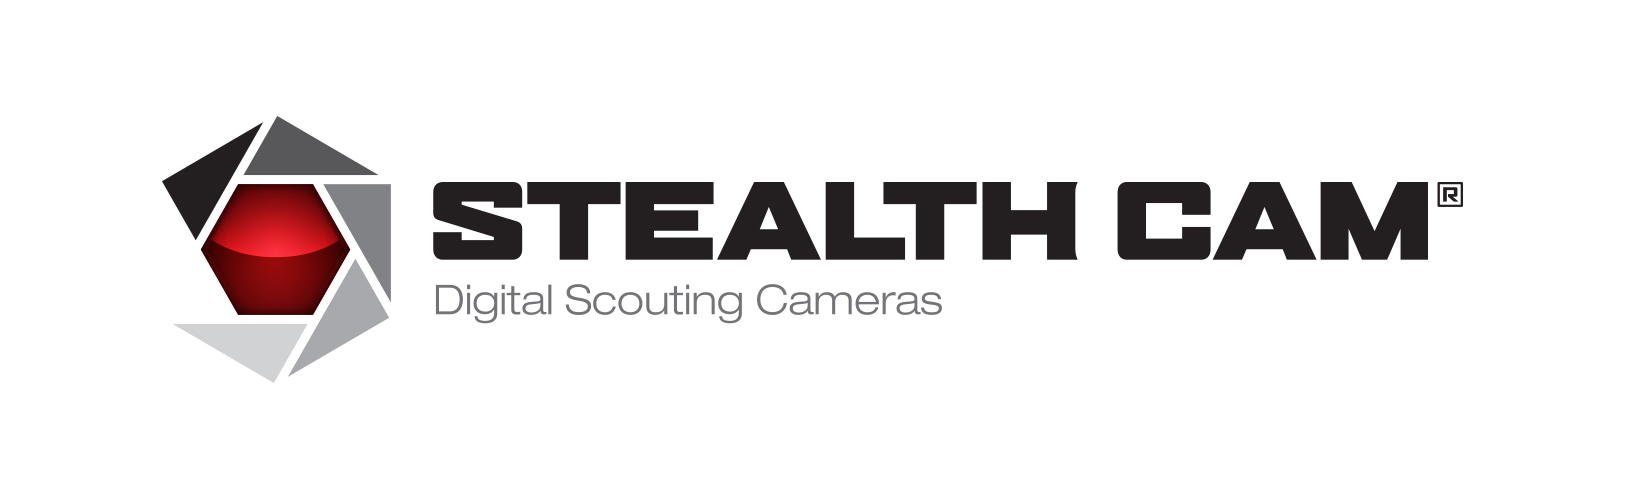 About Stealth Cam